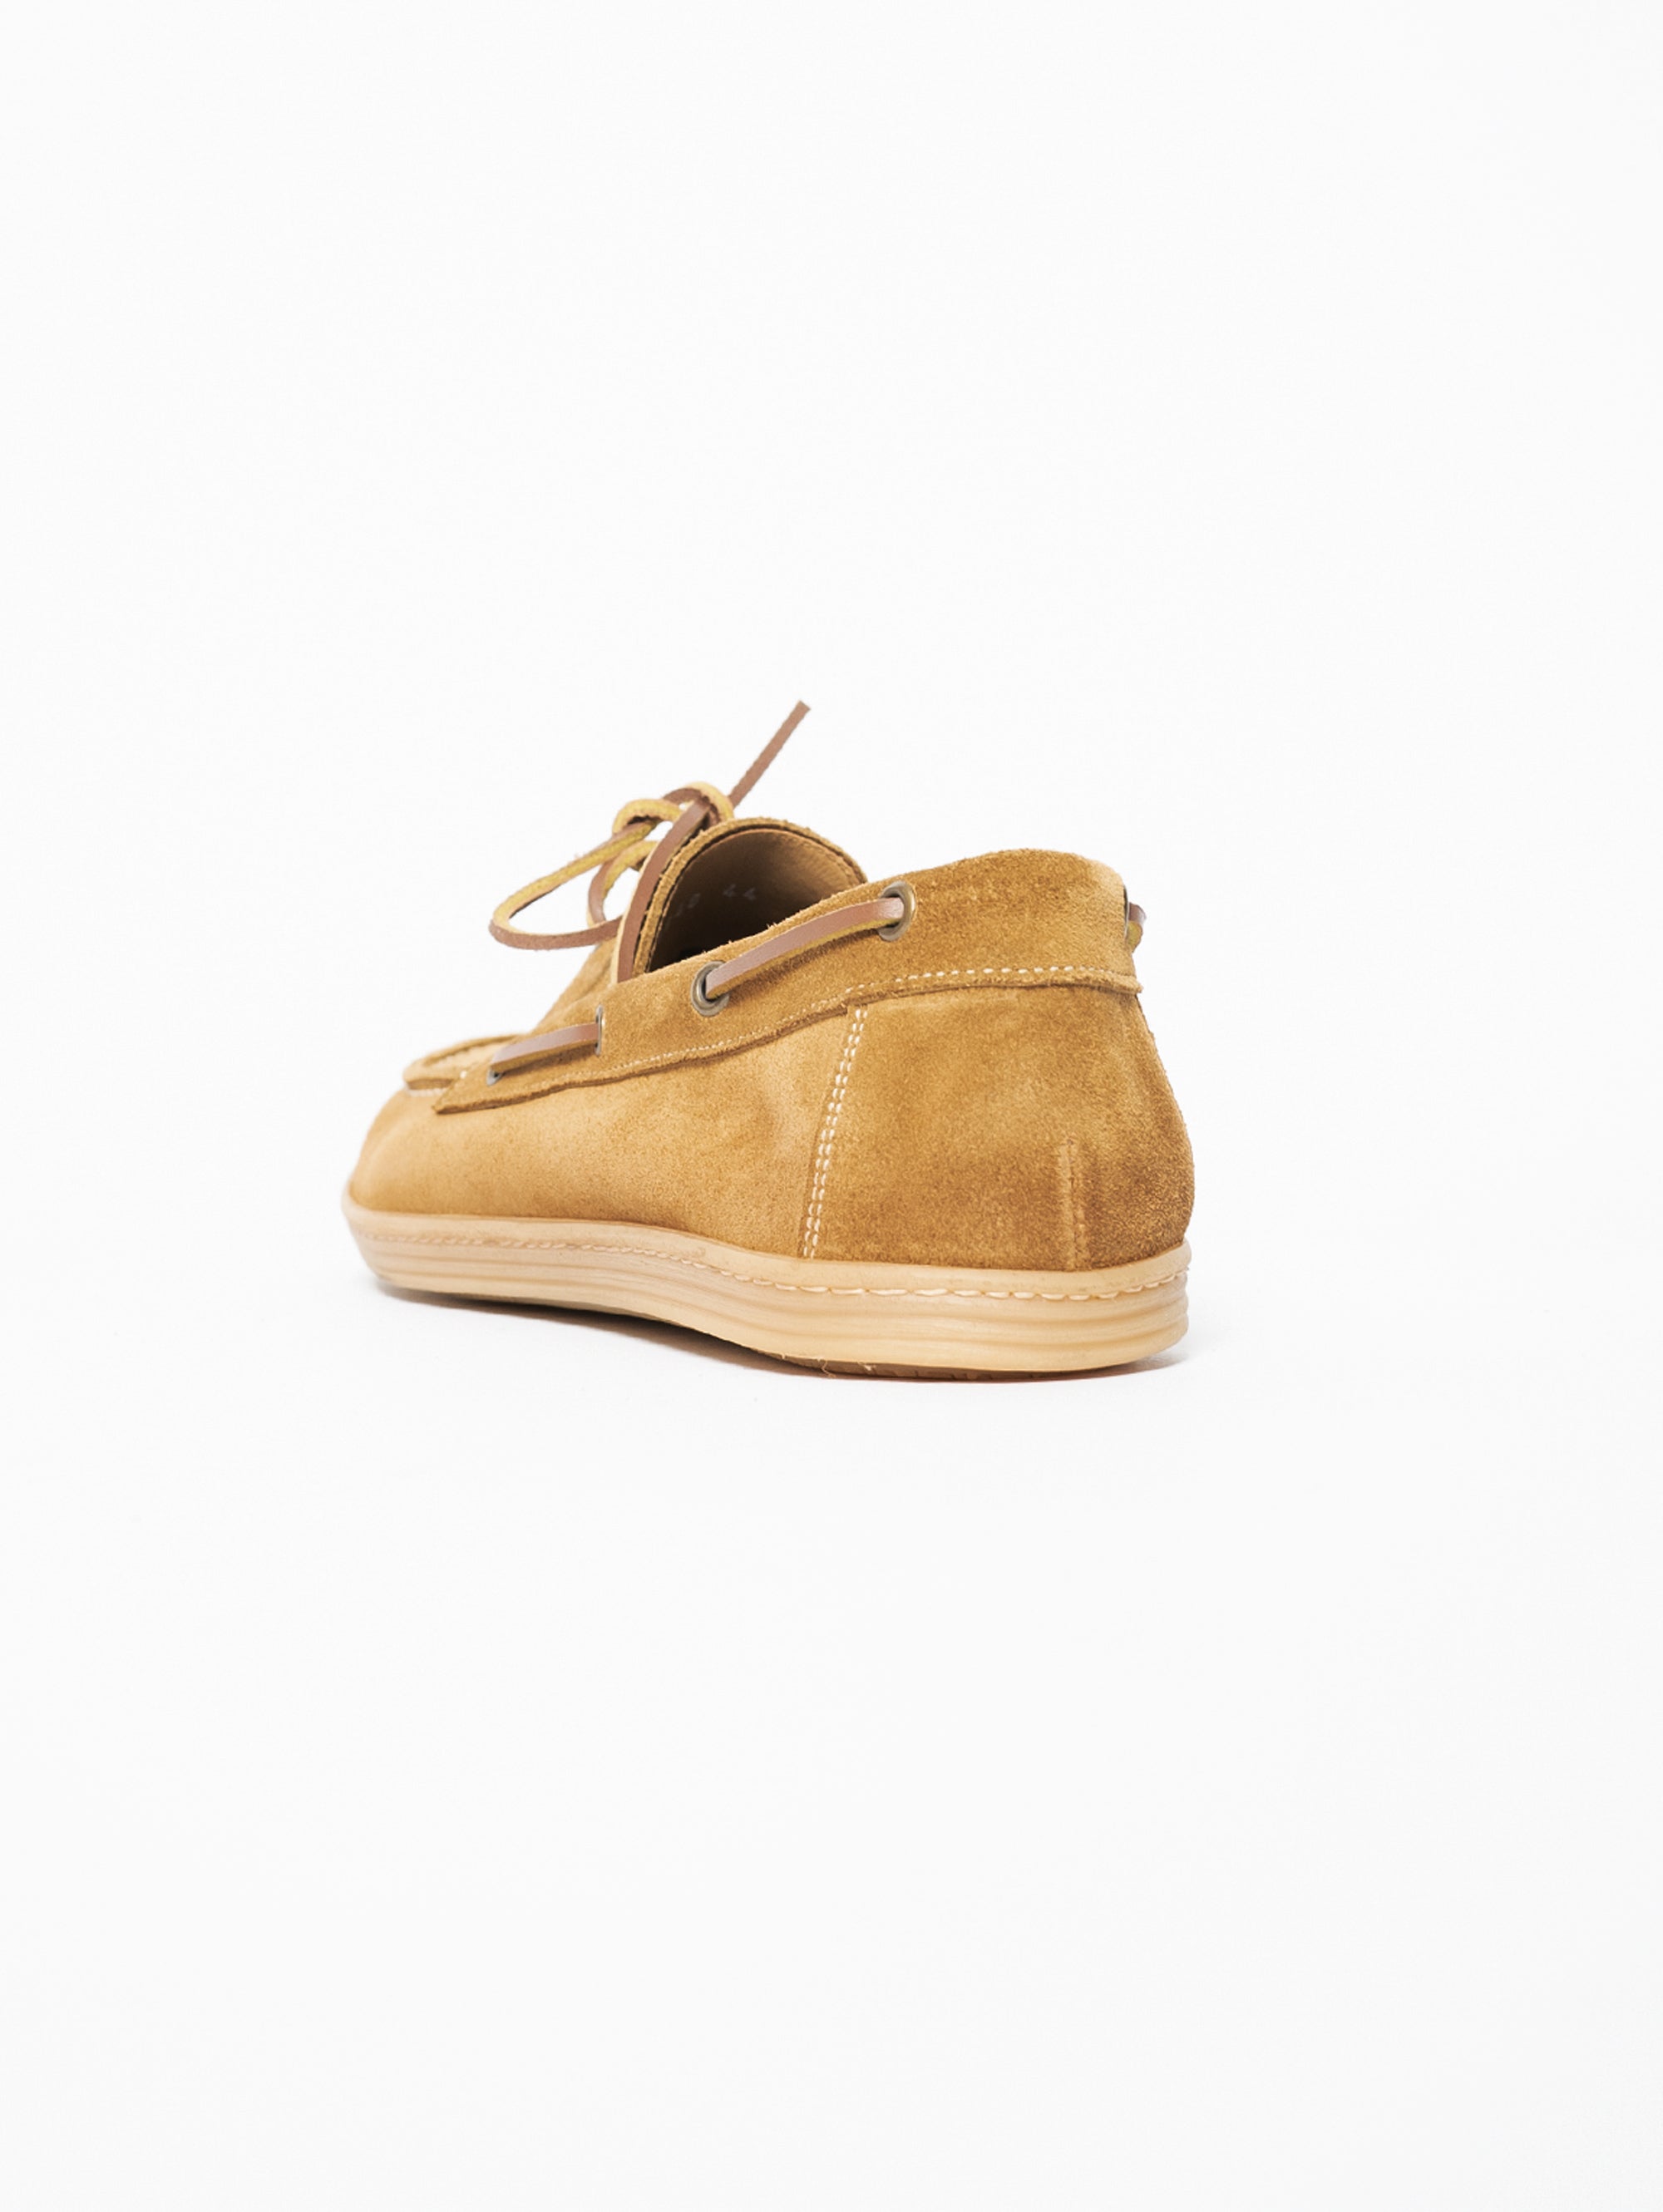 Honey Boat Loafers